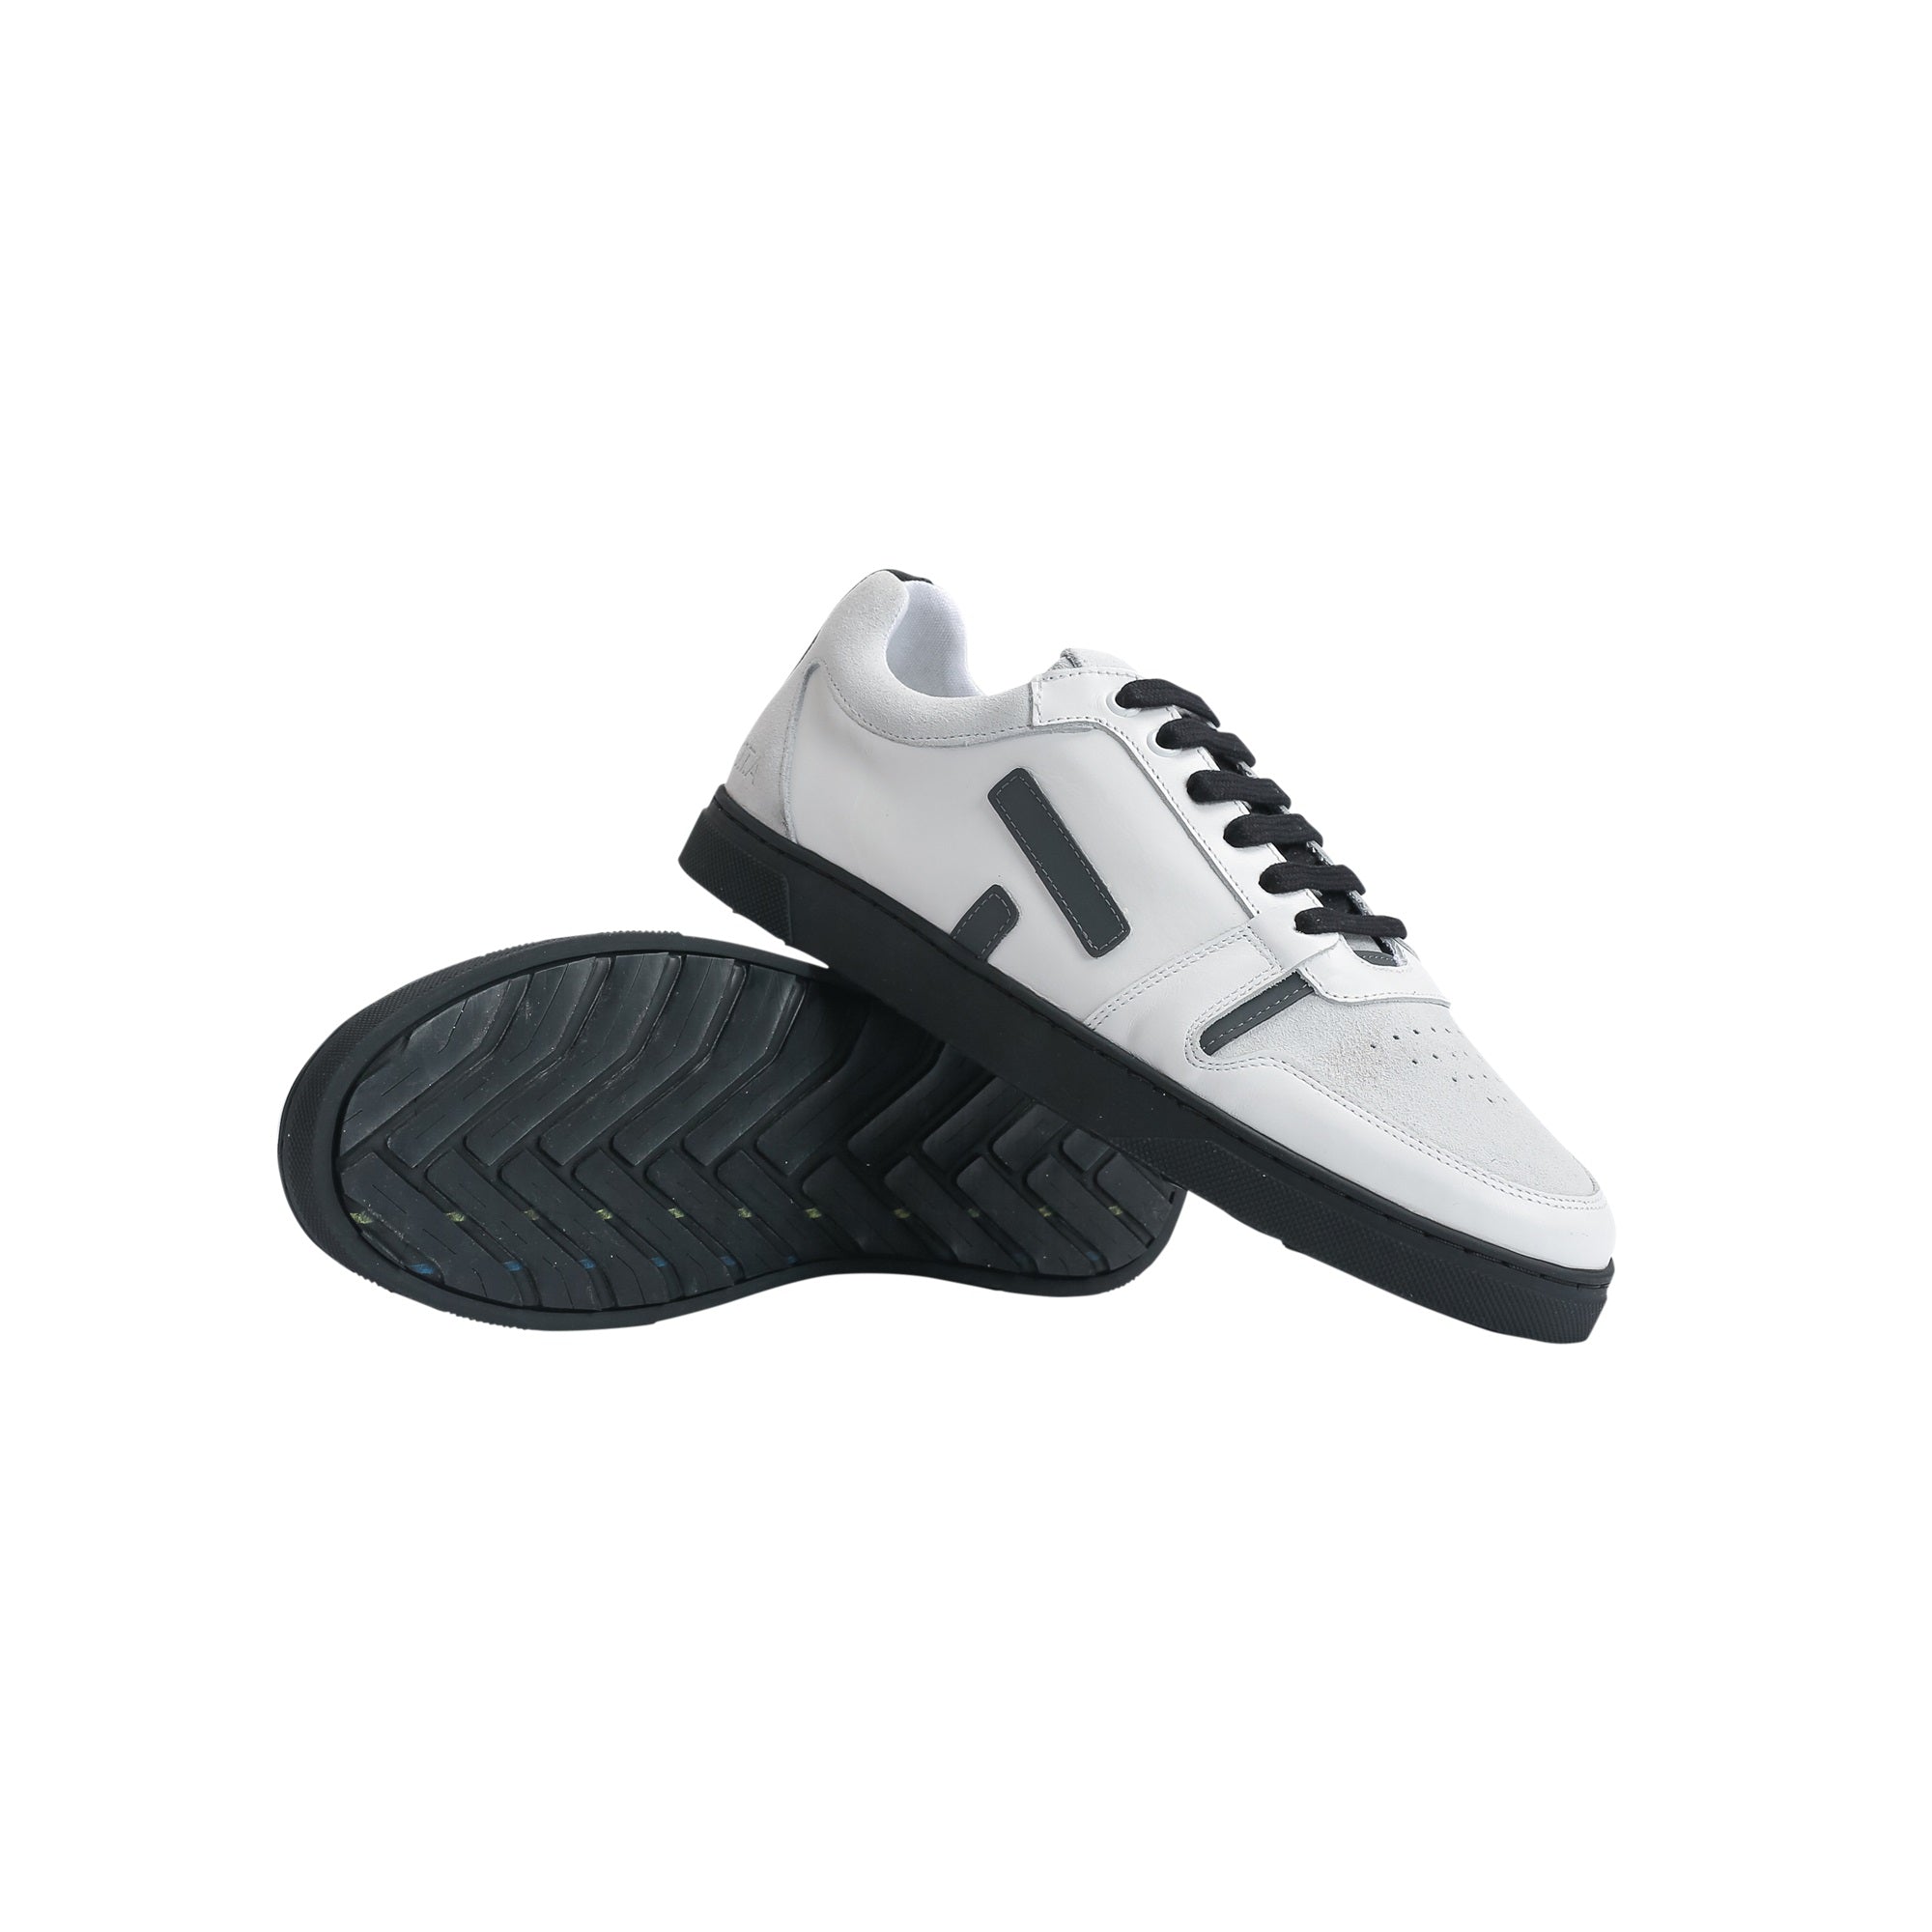 Black and white Sansaho leather sneakers